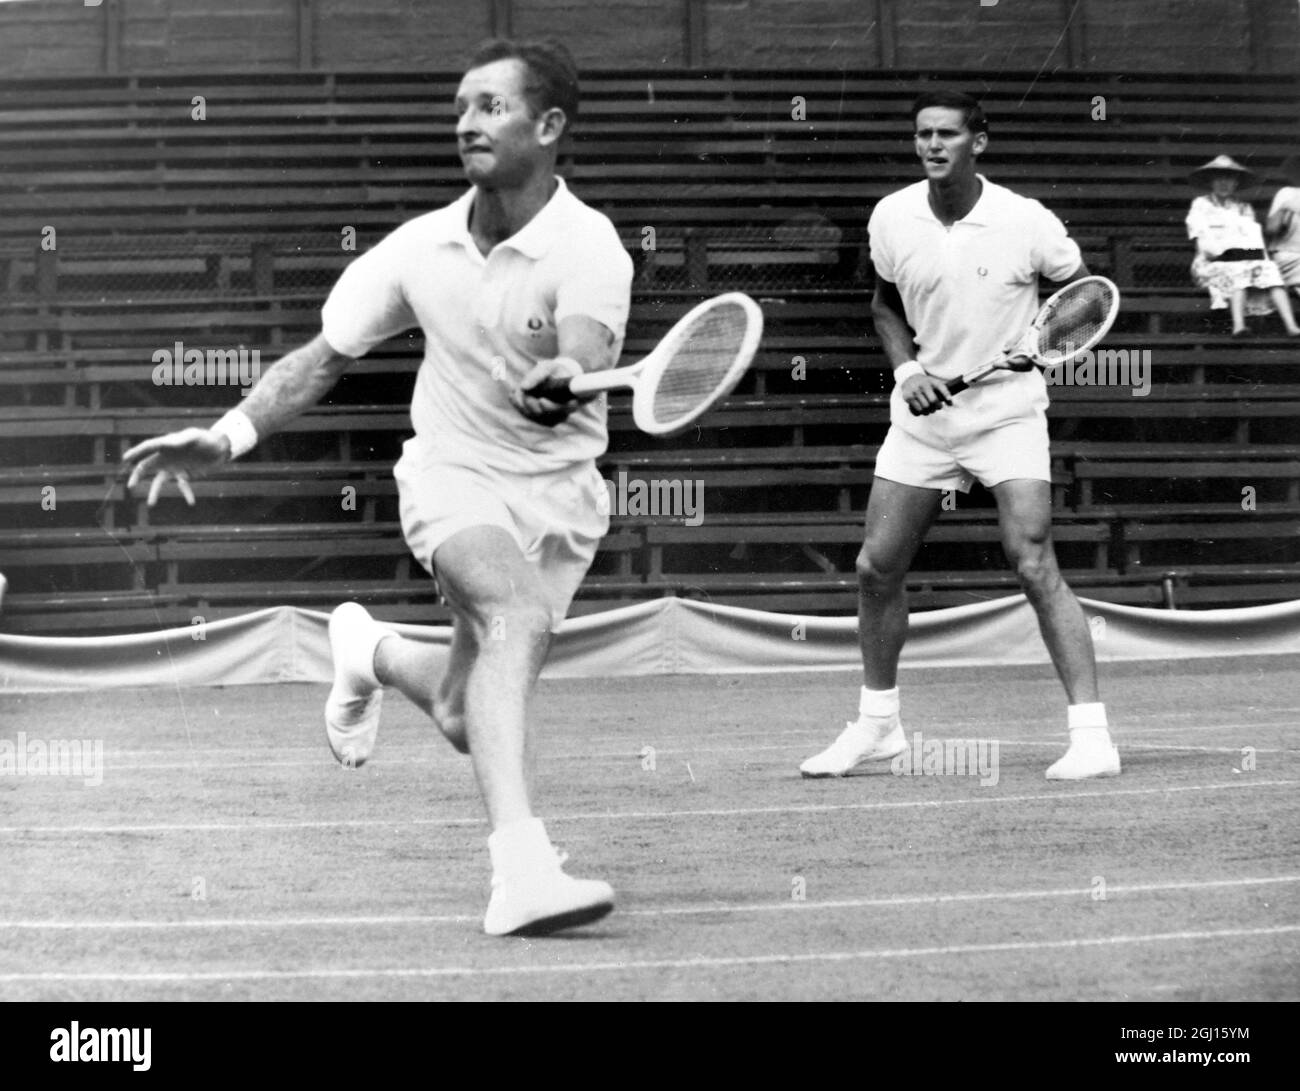 ROD LAVER AND ROY EMERSON IN TENNIS ACTION - ; 31 DECEMBER 1962 Stock Photo  - Alamy